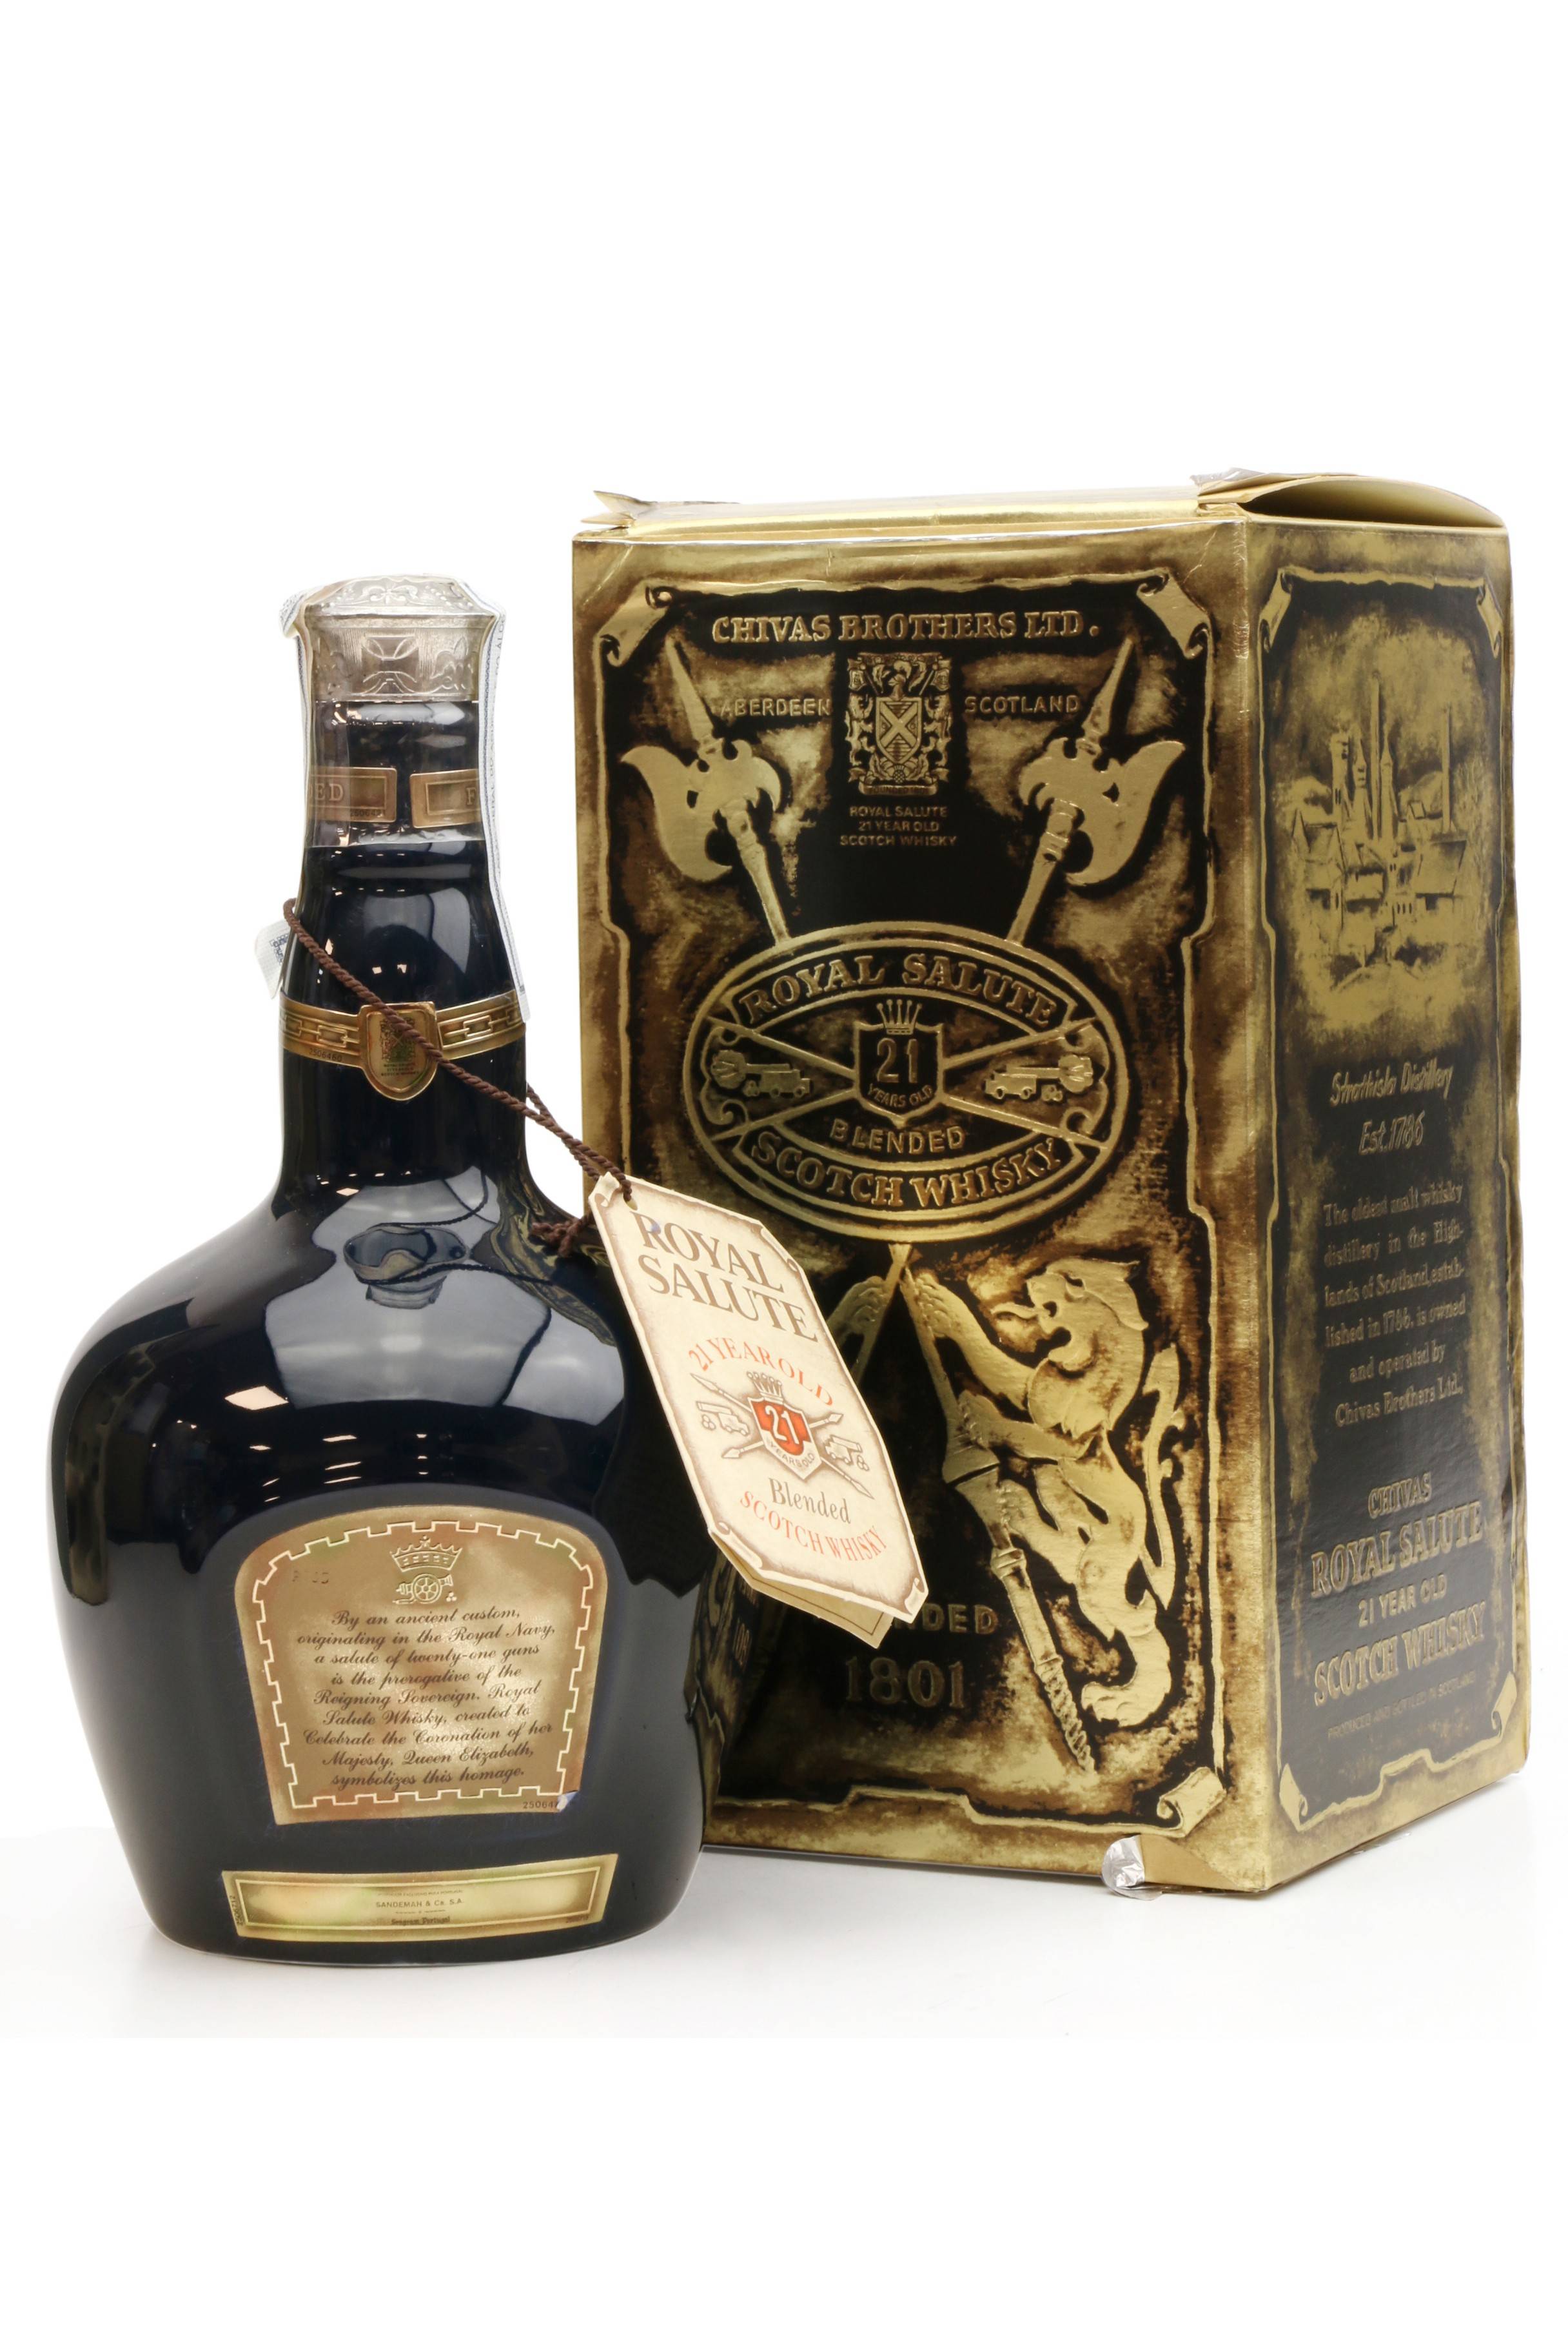 Chivas Royal Salute 21 Years Old - Sapphire Flagon - Just Whisky Auctions